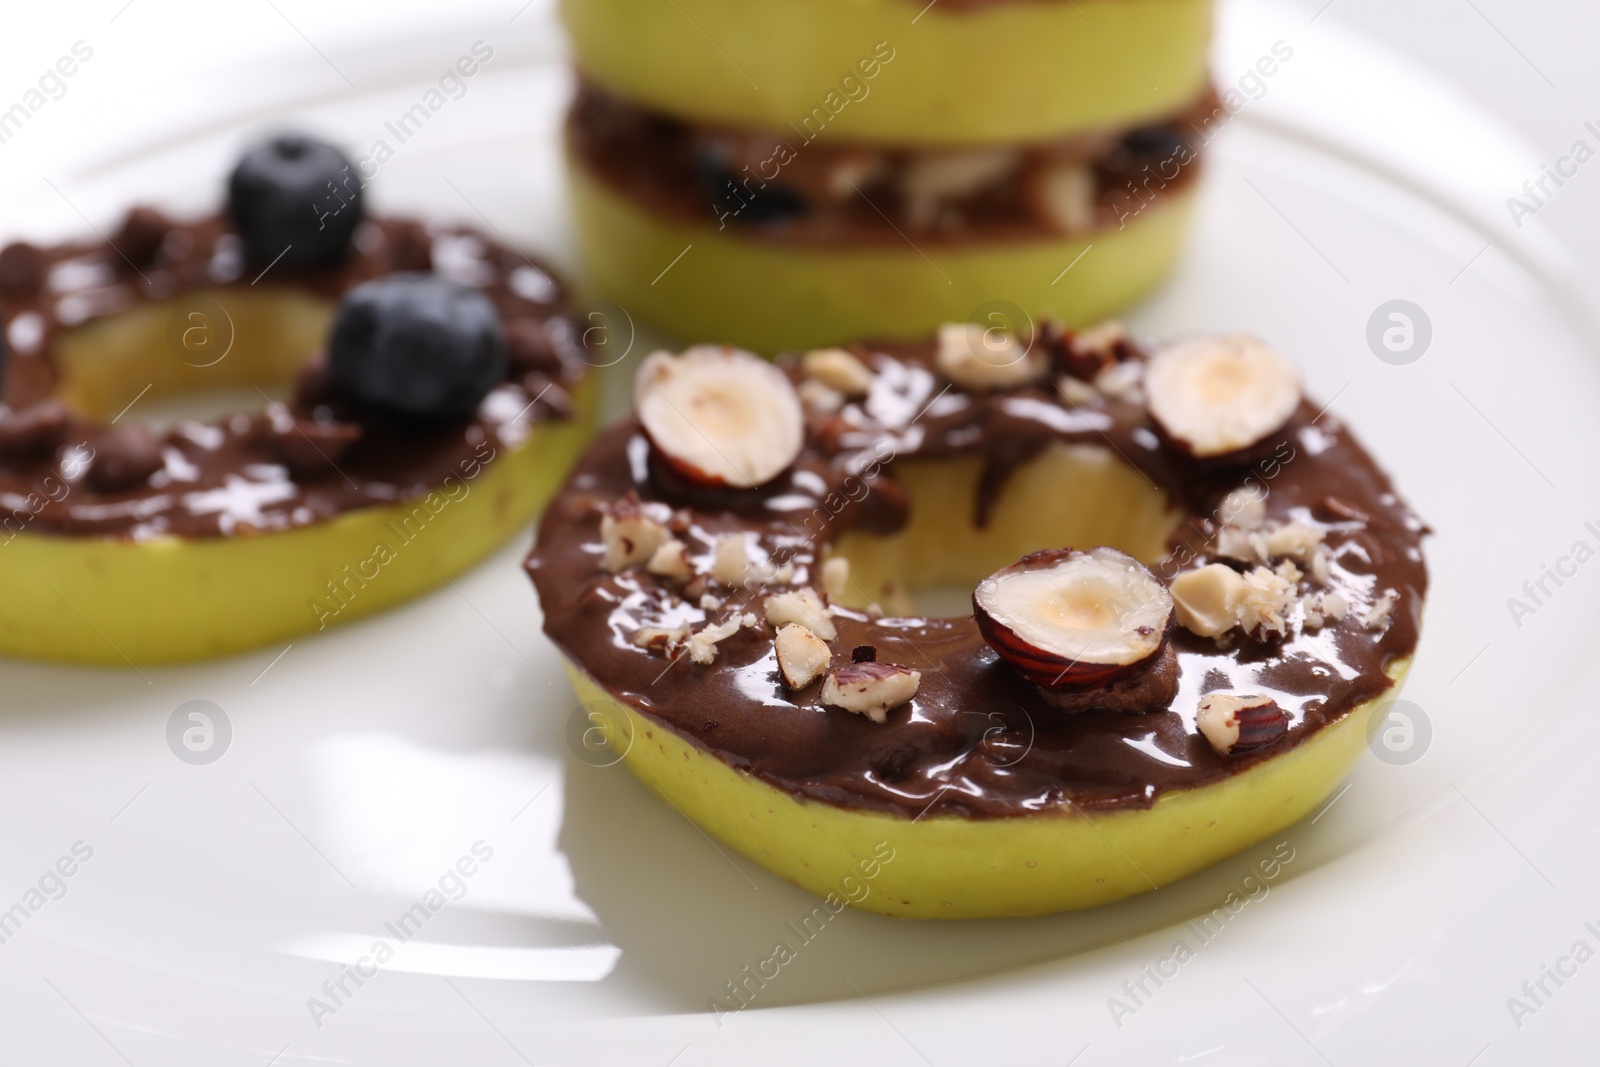 Photo of Fresh apples with nut butters, blueberries and hazelnuts on plate, closeup